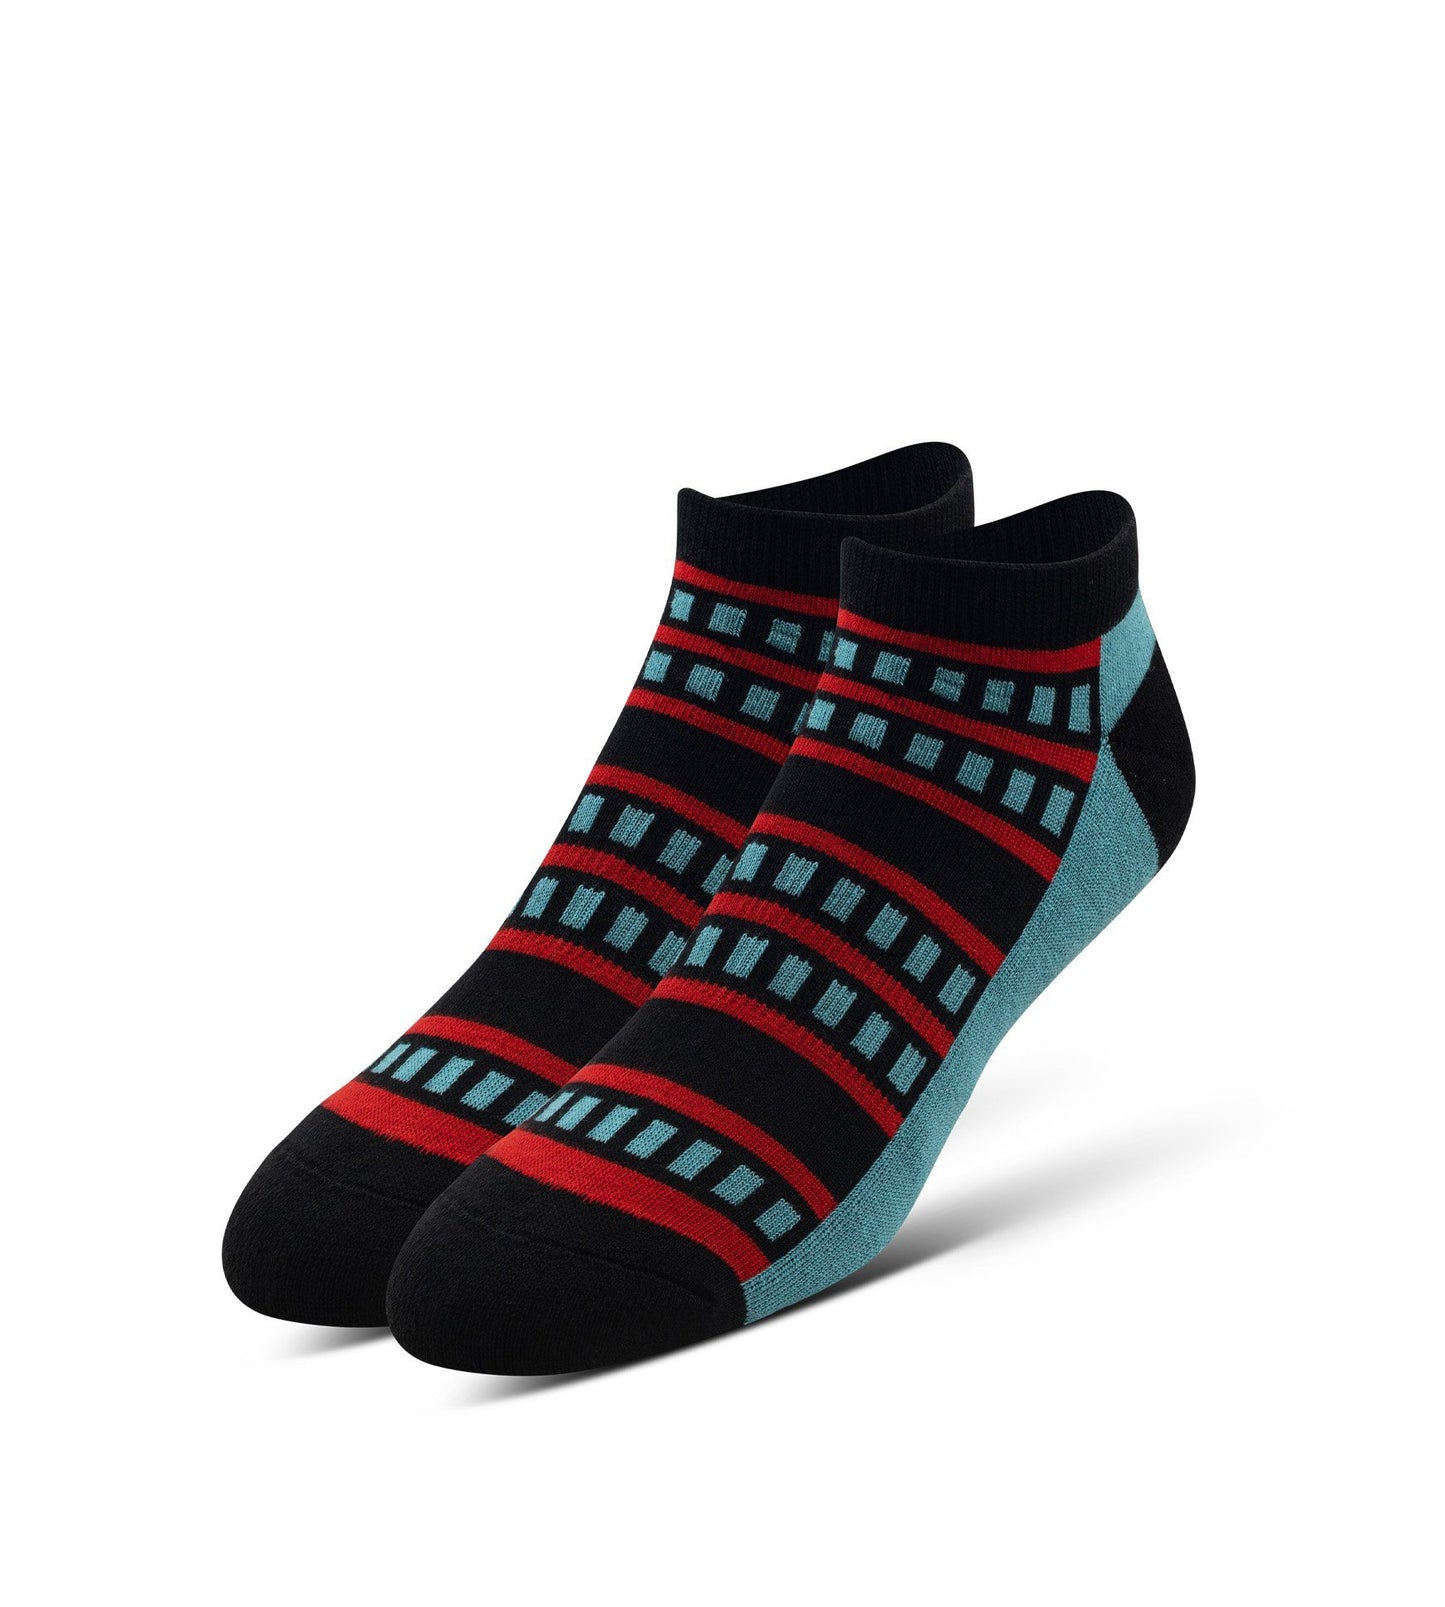 Cushion Low-Cut Socks 3 Pack, black red stripes with blue squares